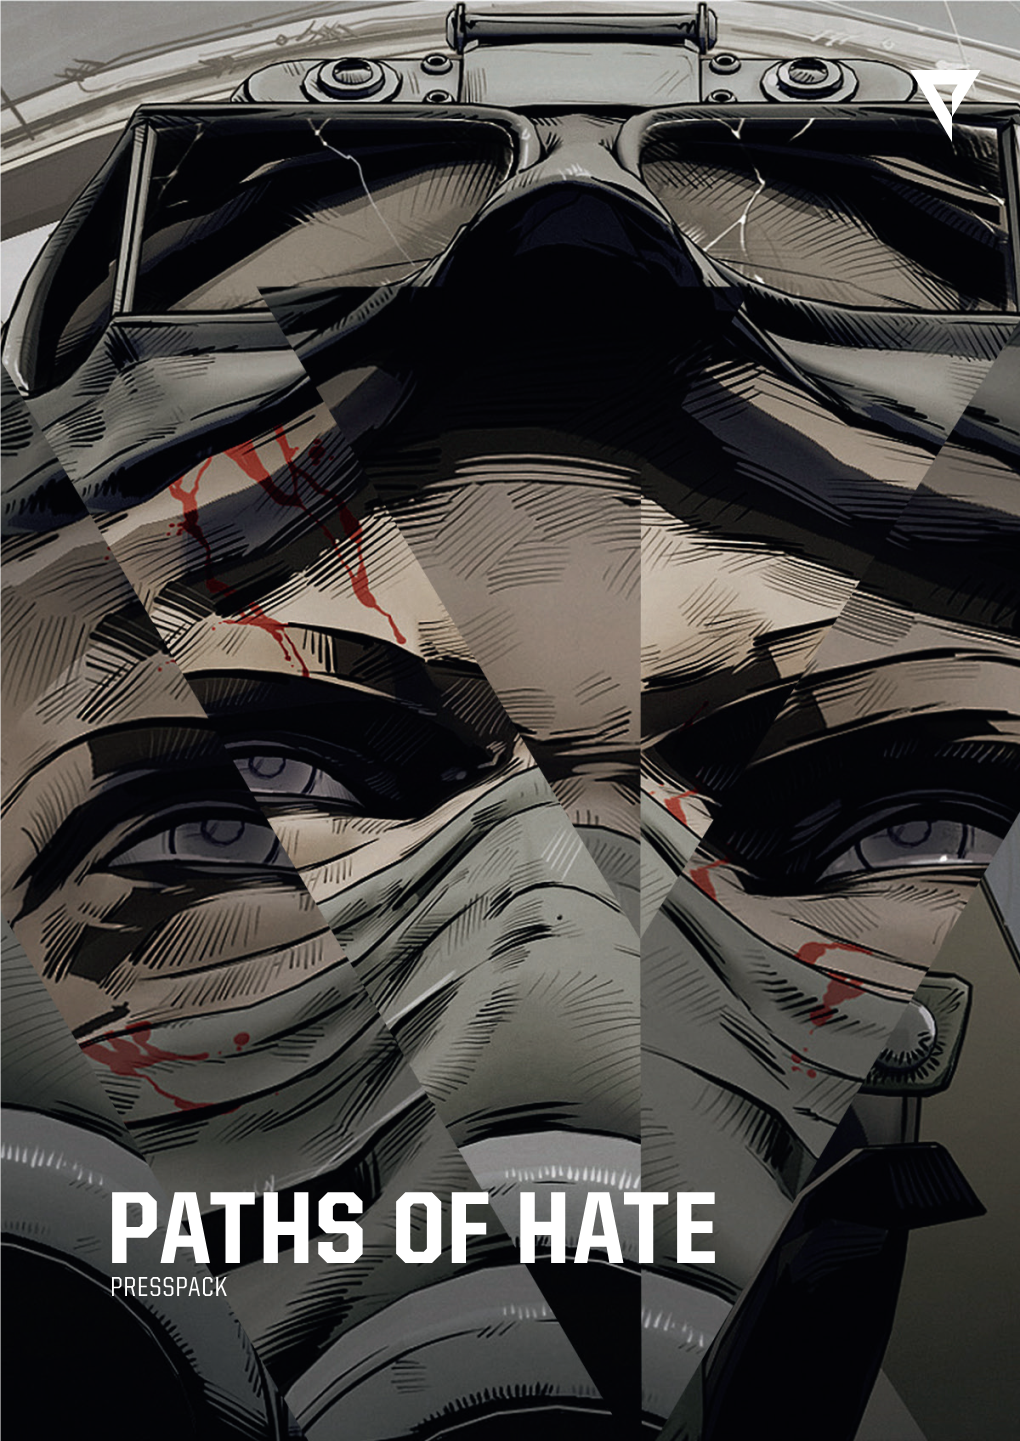 Paths of Hate PRESSPACK Damian Nenow Paths of Hate